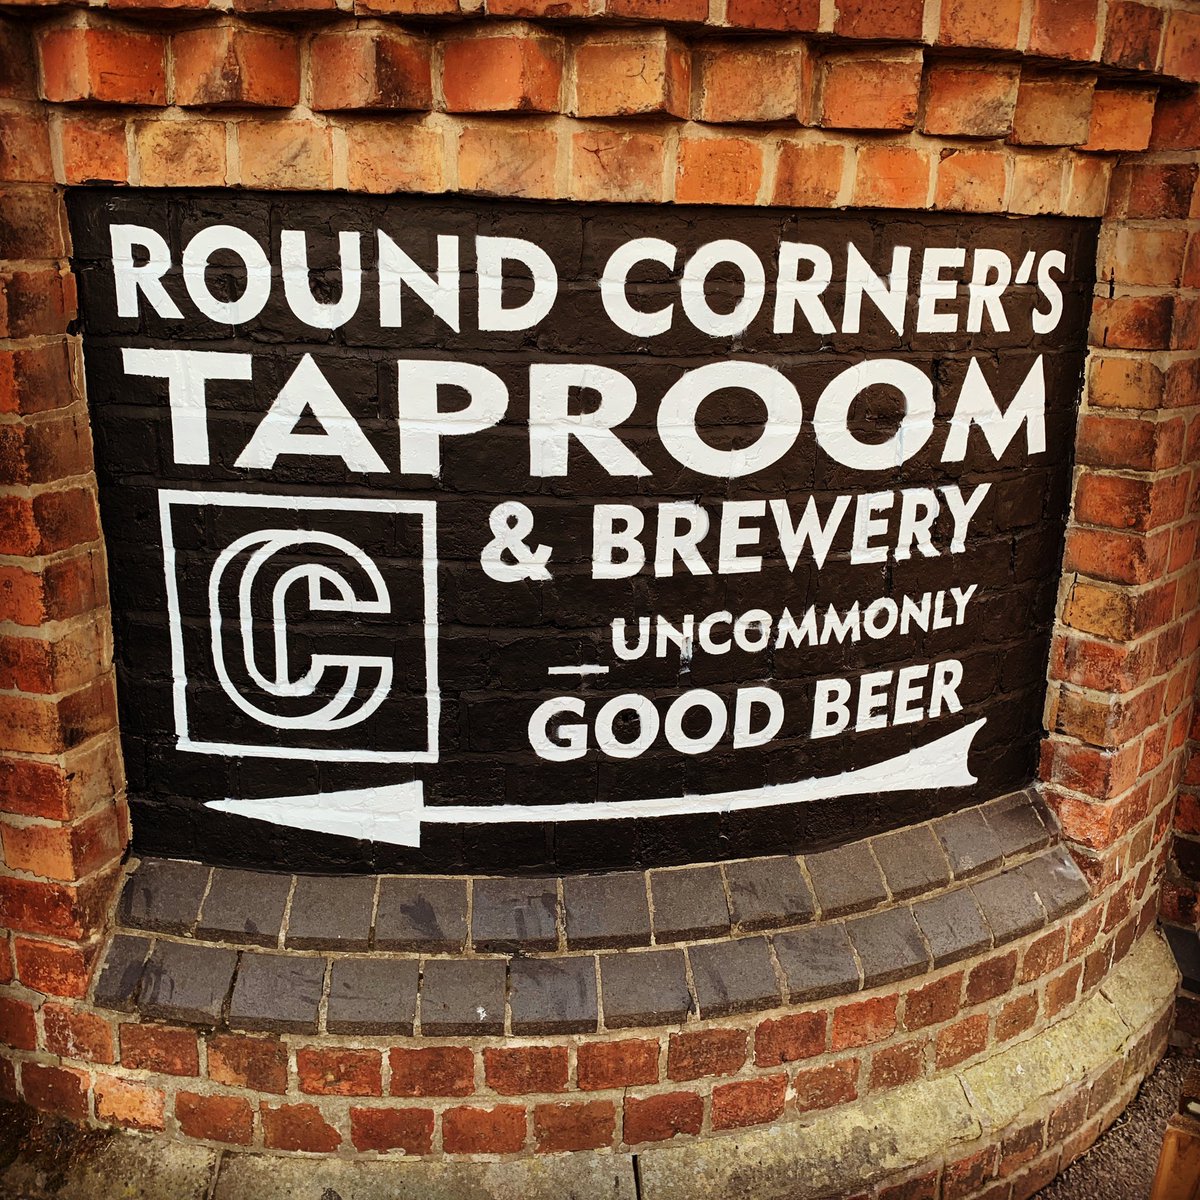 It’s #marketday tomorrow. Taproom open from 8am. Nothing like a #breakfastbeer 🍺#attheheartofitall #uncommonlygoodbeer #mondaymotivation #meltonmowbray #ourcommunity